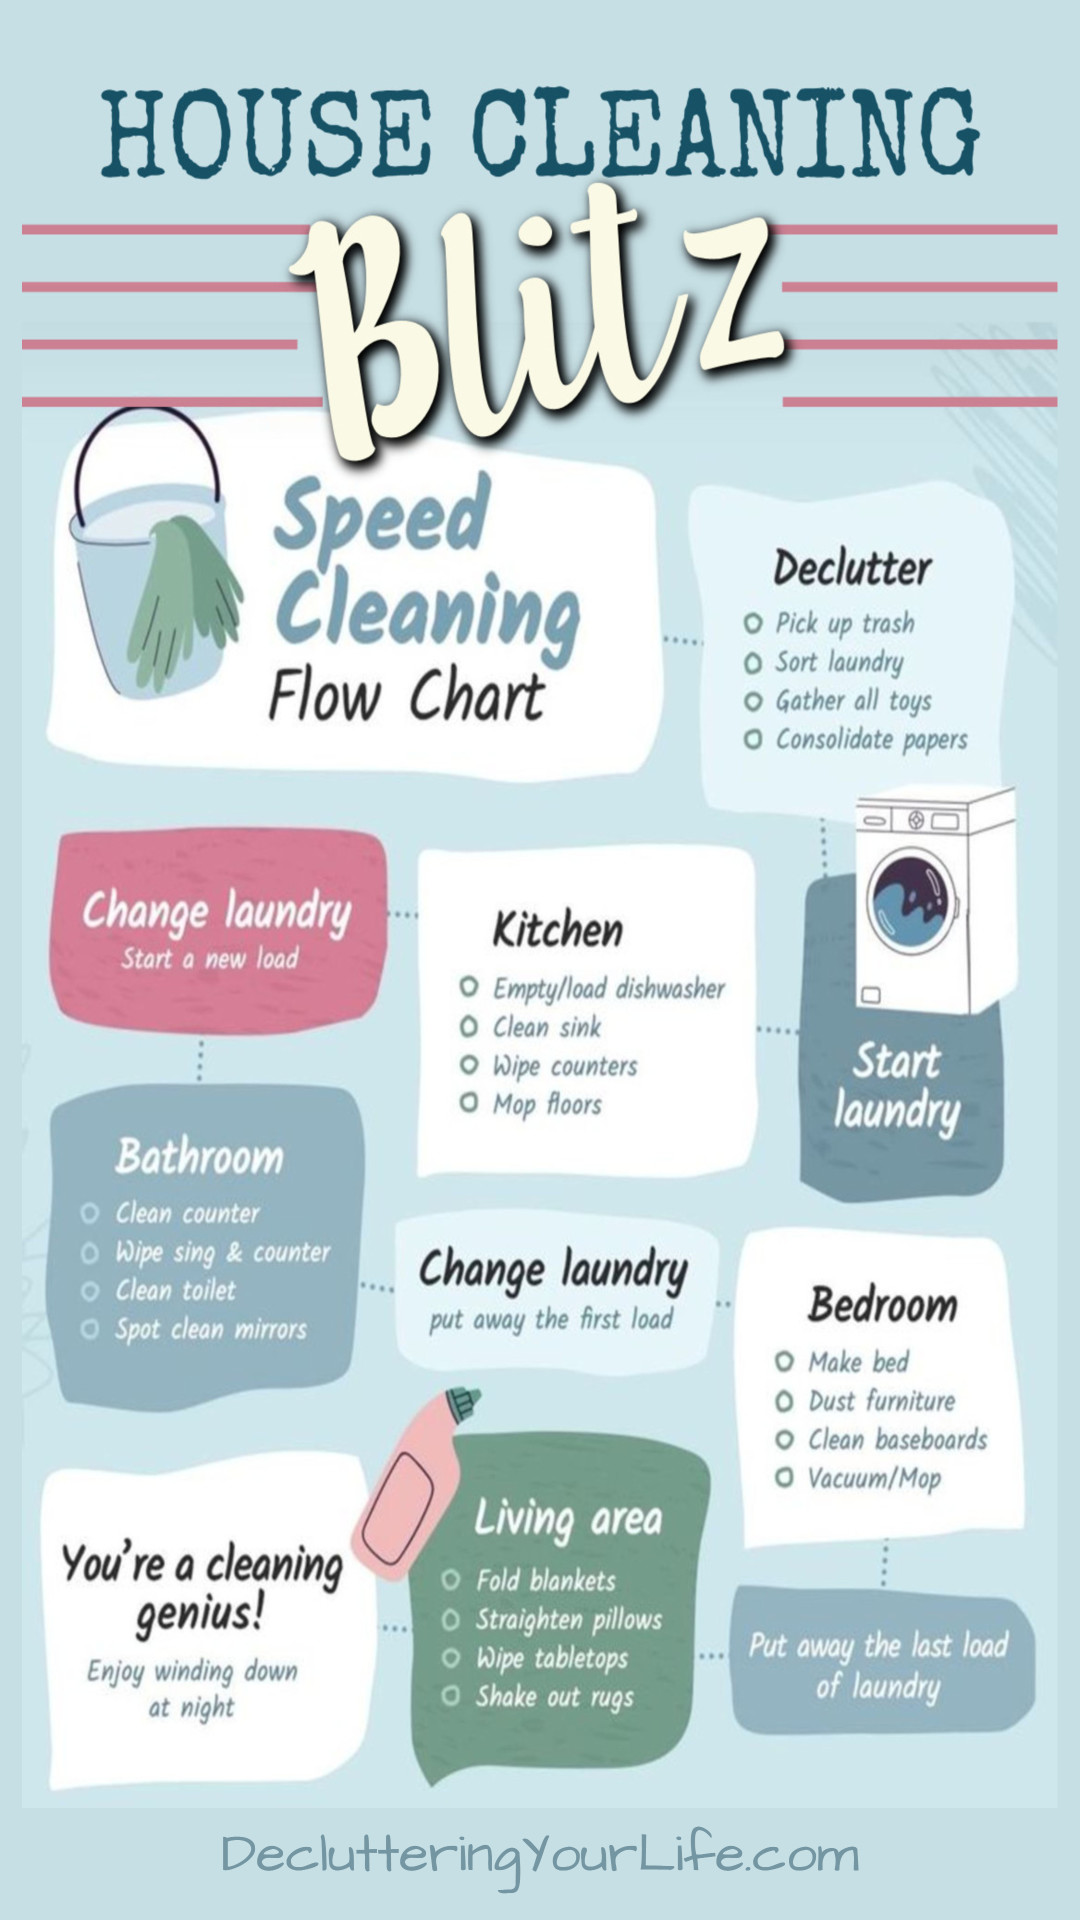 House cleaning blitz checklist for speed cleaning flow of household chores